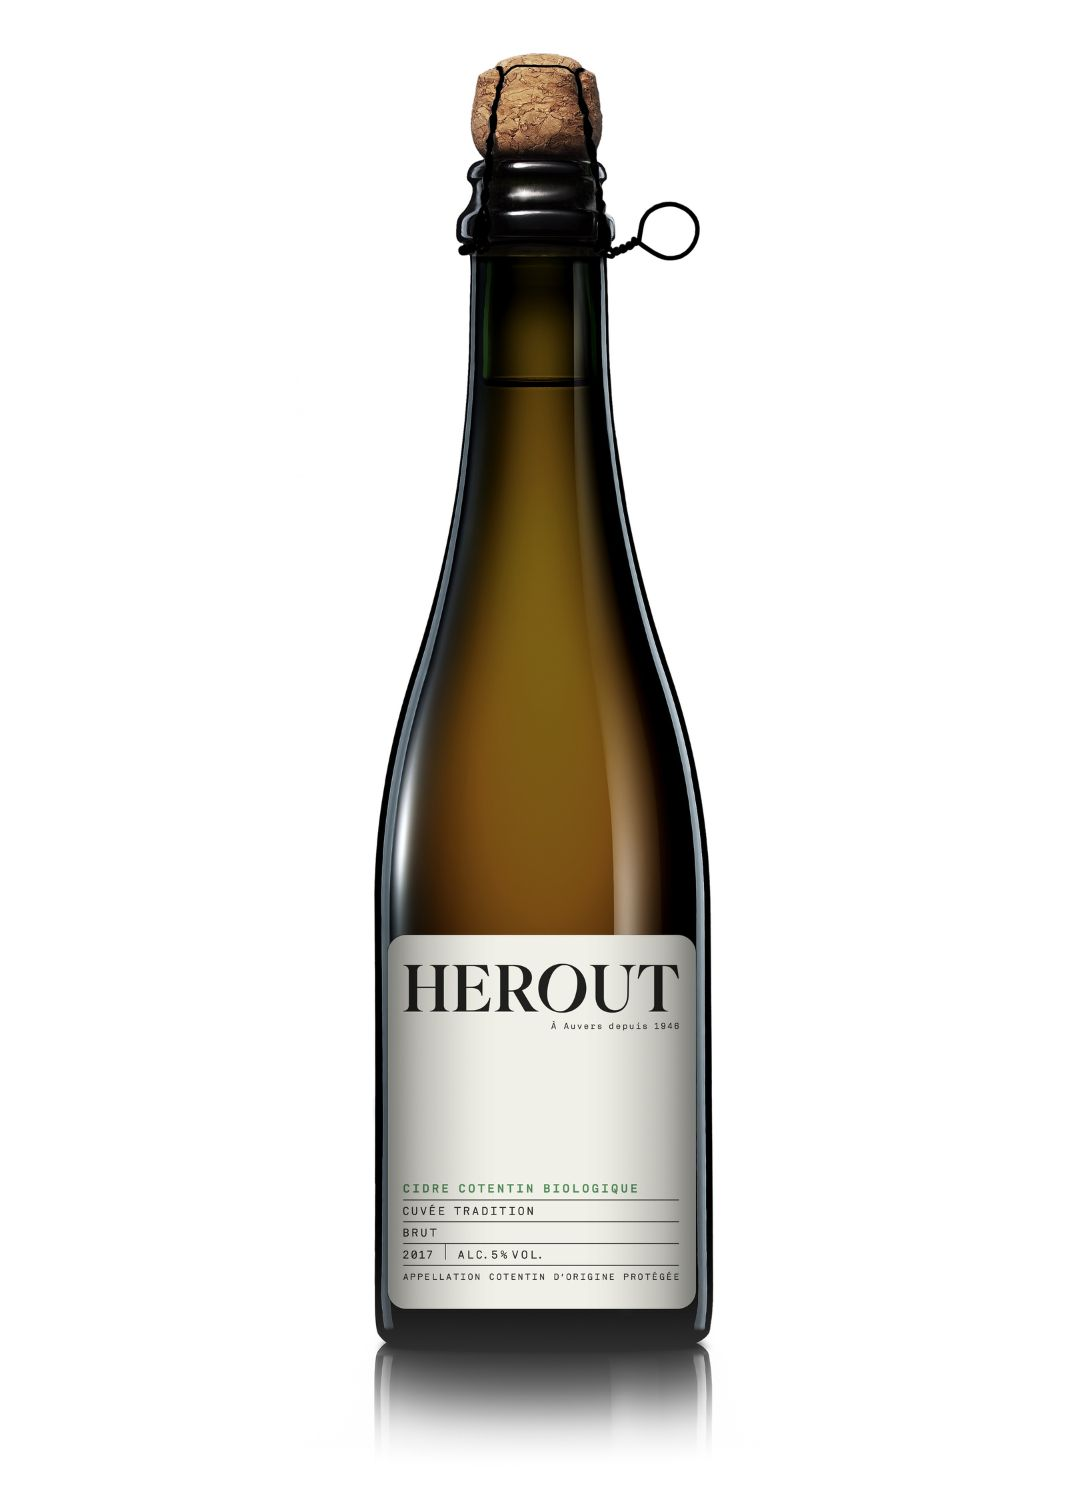 Bottle of Maison Herout Tradition Brut Cider 2020 from French Cider & Spirits